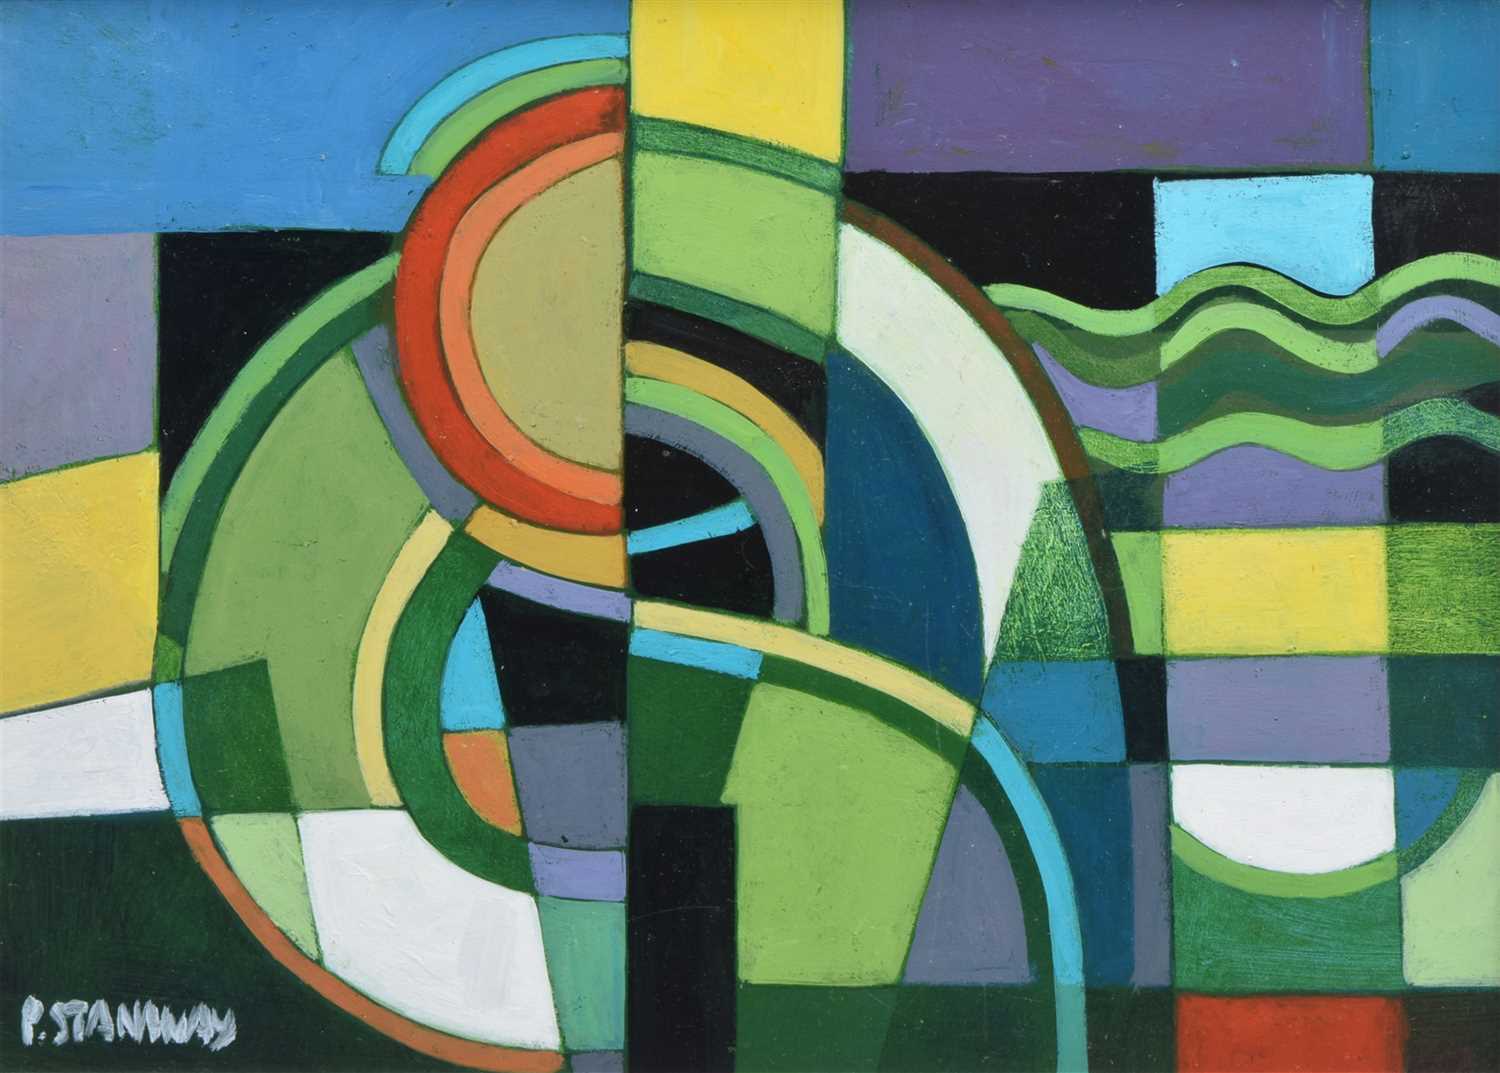 Lot 387 - Peter Stanaway, "Curved Shapes", acrylic.